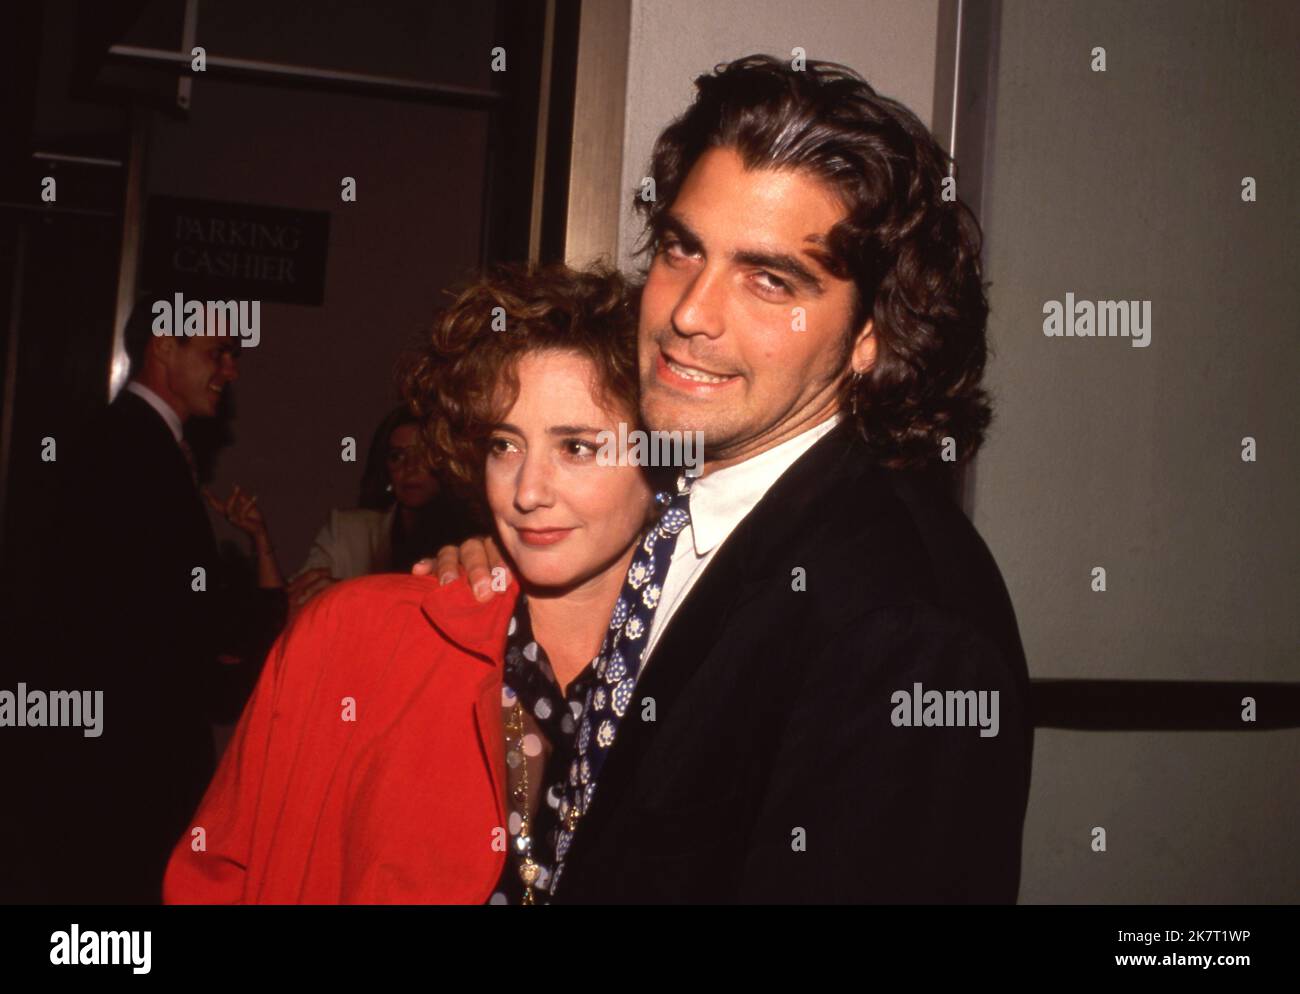 George Clooney and Talia Balsam at the ABC Annual Fall Affiliates Dinner on June 14, 1990 Credit: Ralph Dominguez/MediaPunch Stock Photo